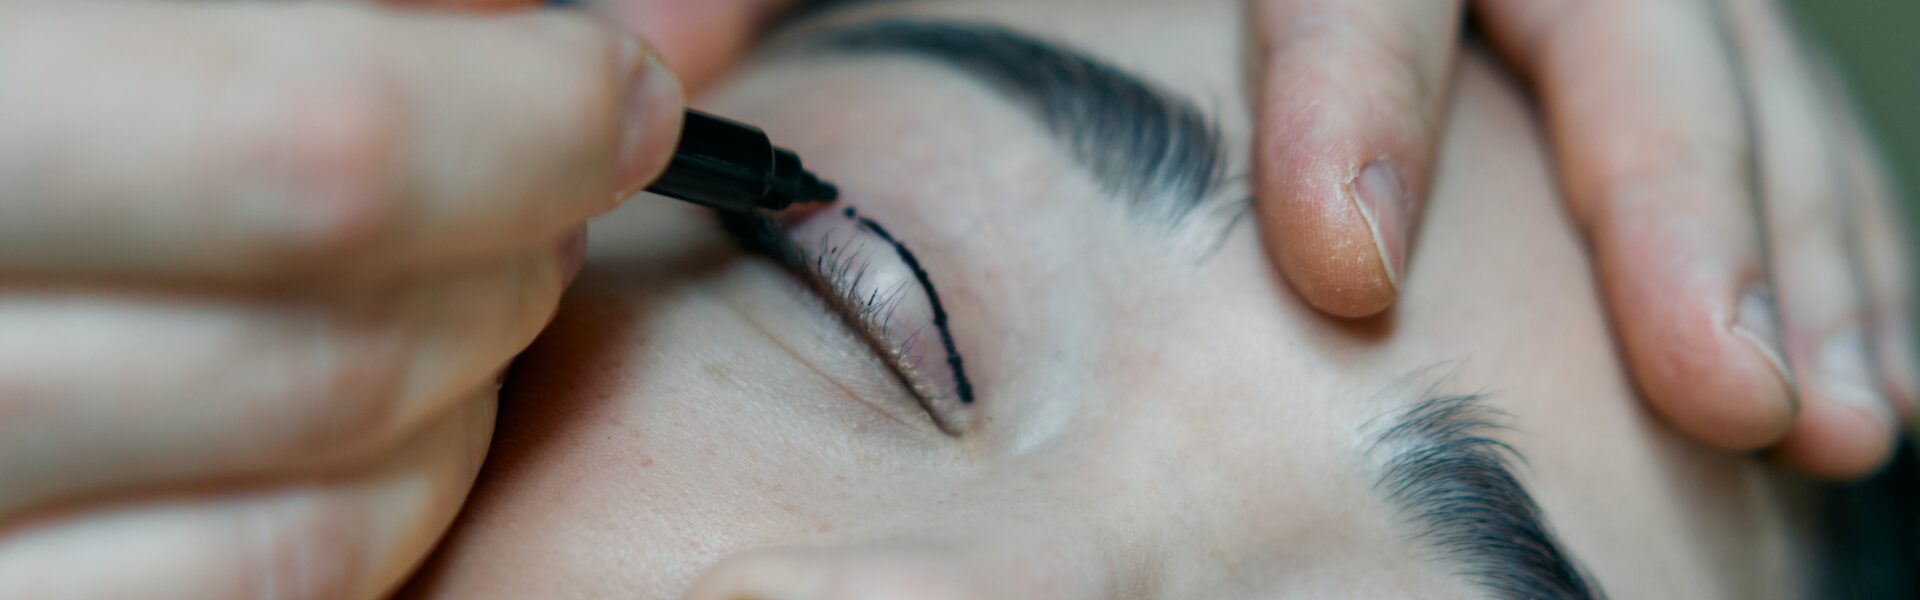 Blepharoplasty: How Eyelid Surgery Can Refresh and Revitalize Your Look banner